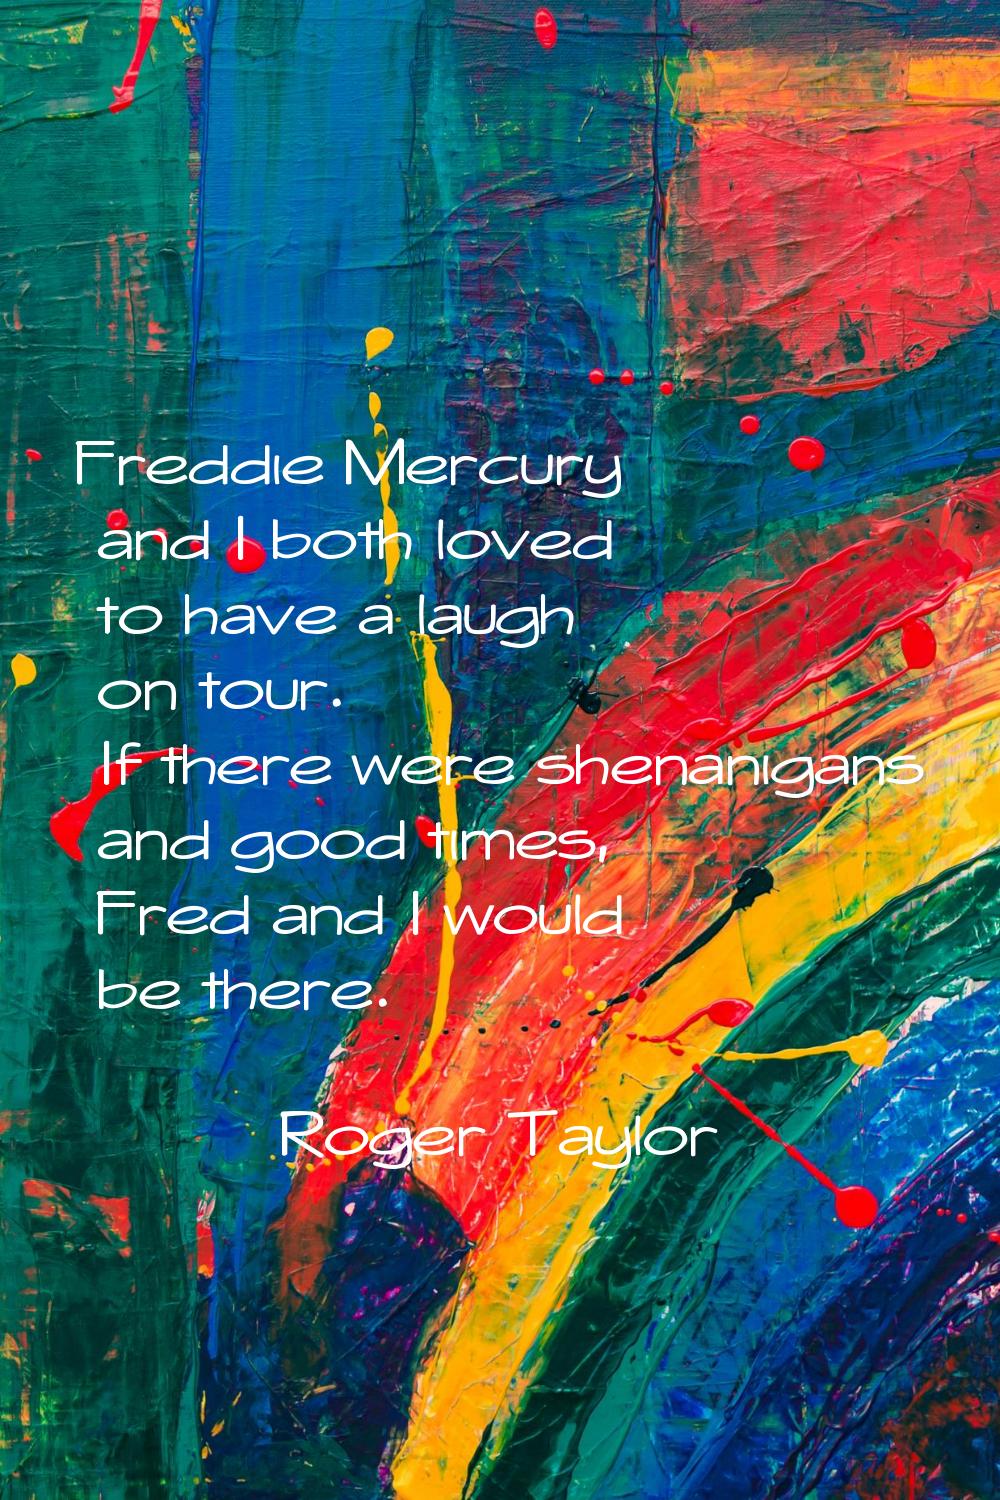 Freddie Mercury and I both loved to have a laugh on tour. If there were shenanigans and good times,